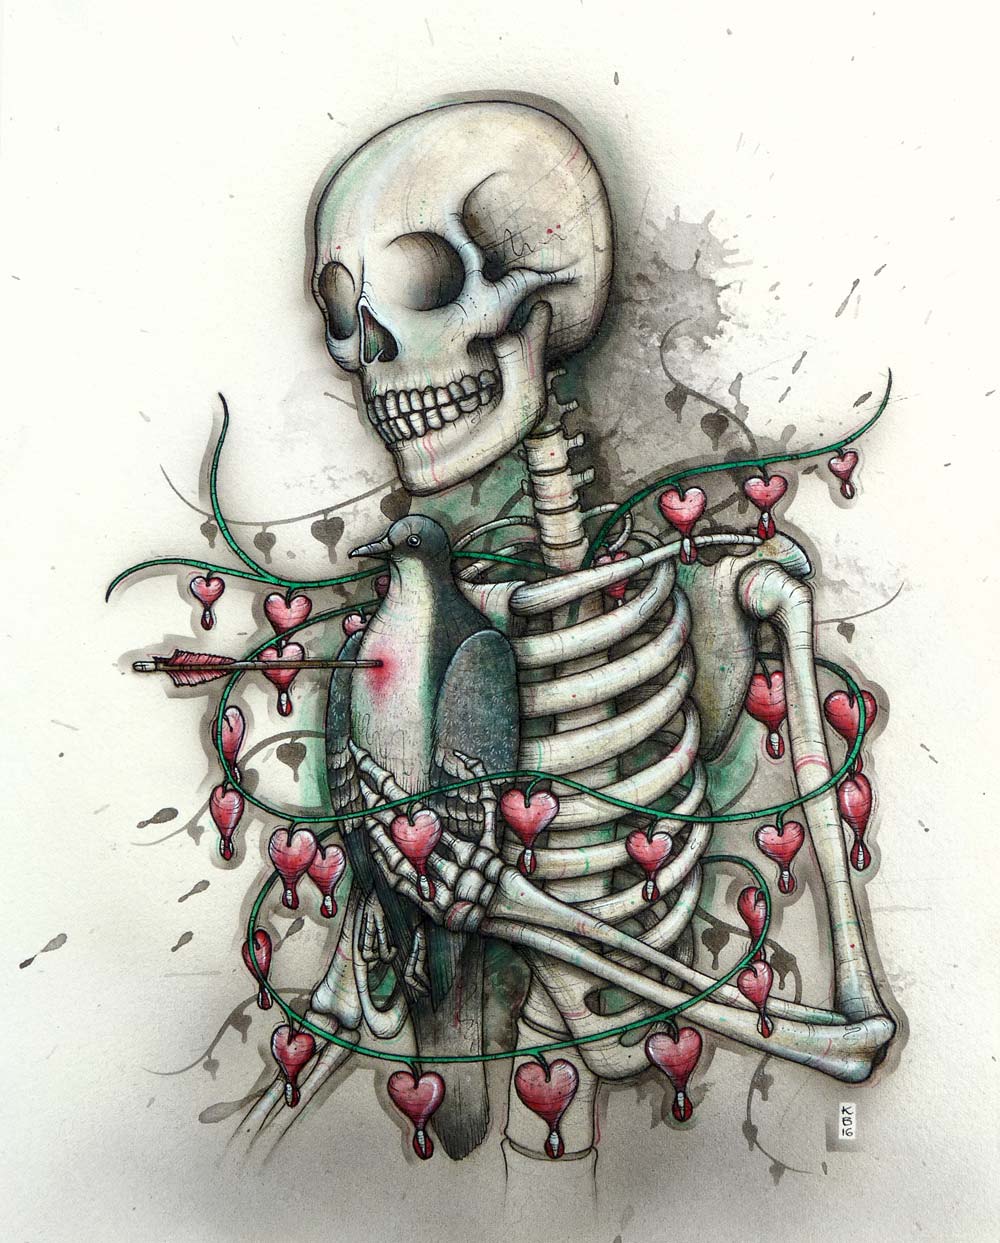 This skeleton holds a bleeding heart dove pierced by an arrow, surrounded by bleeding heart vines